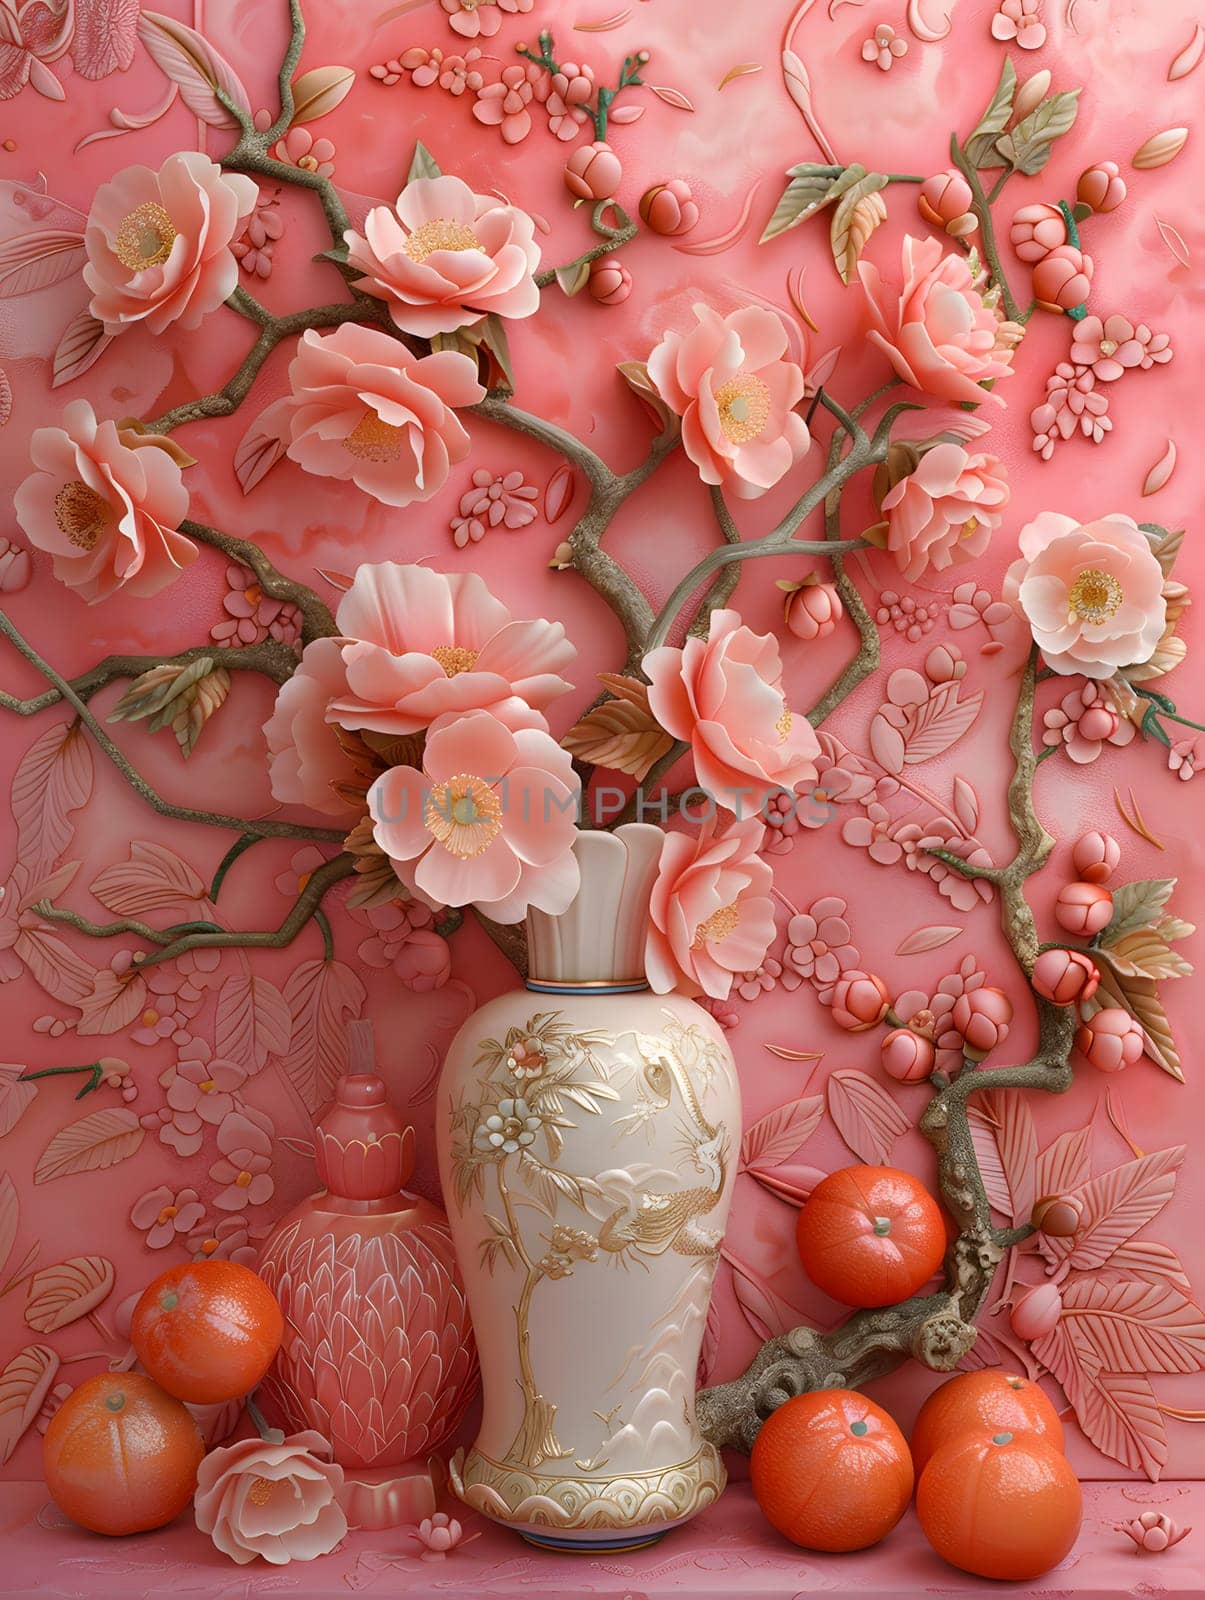 Vase with flowers and oranges on pink background, perfect for flower arranging by Nadtochiy